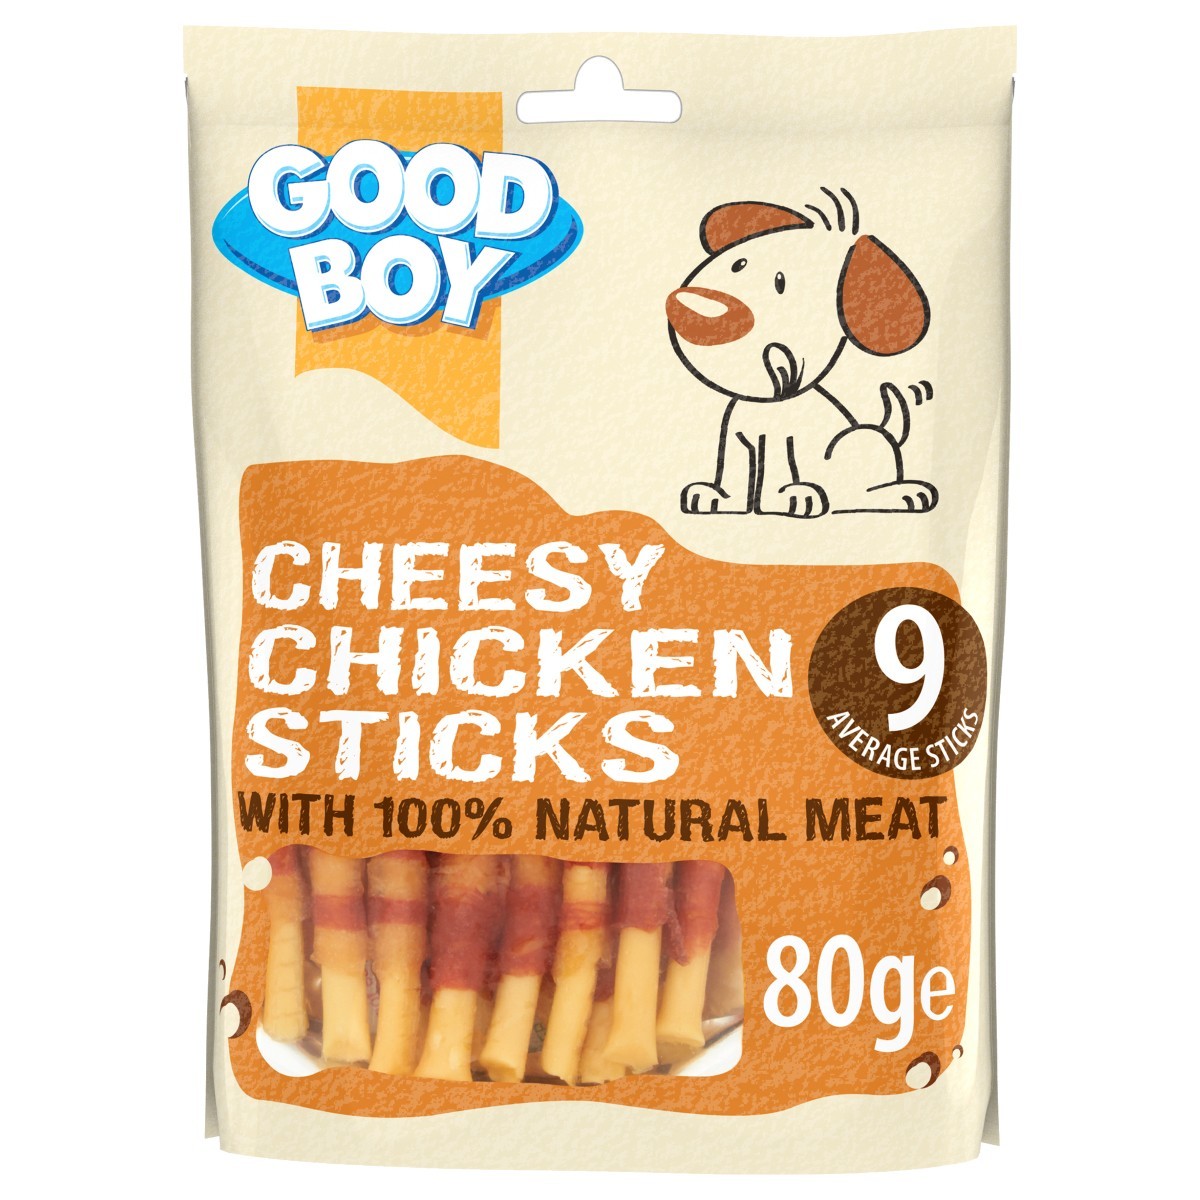 are sticks good for dogs